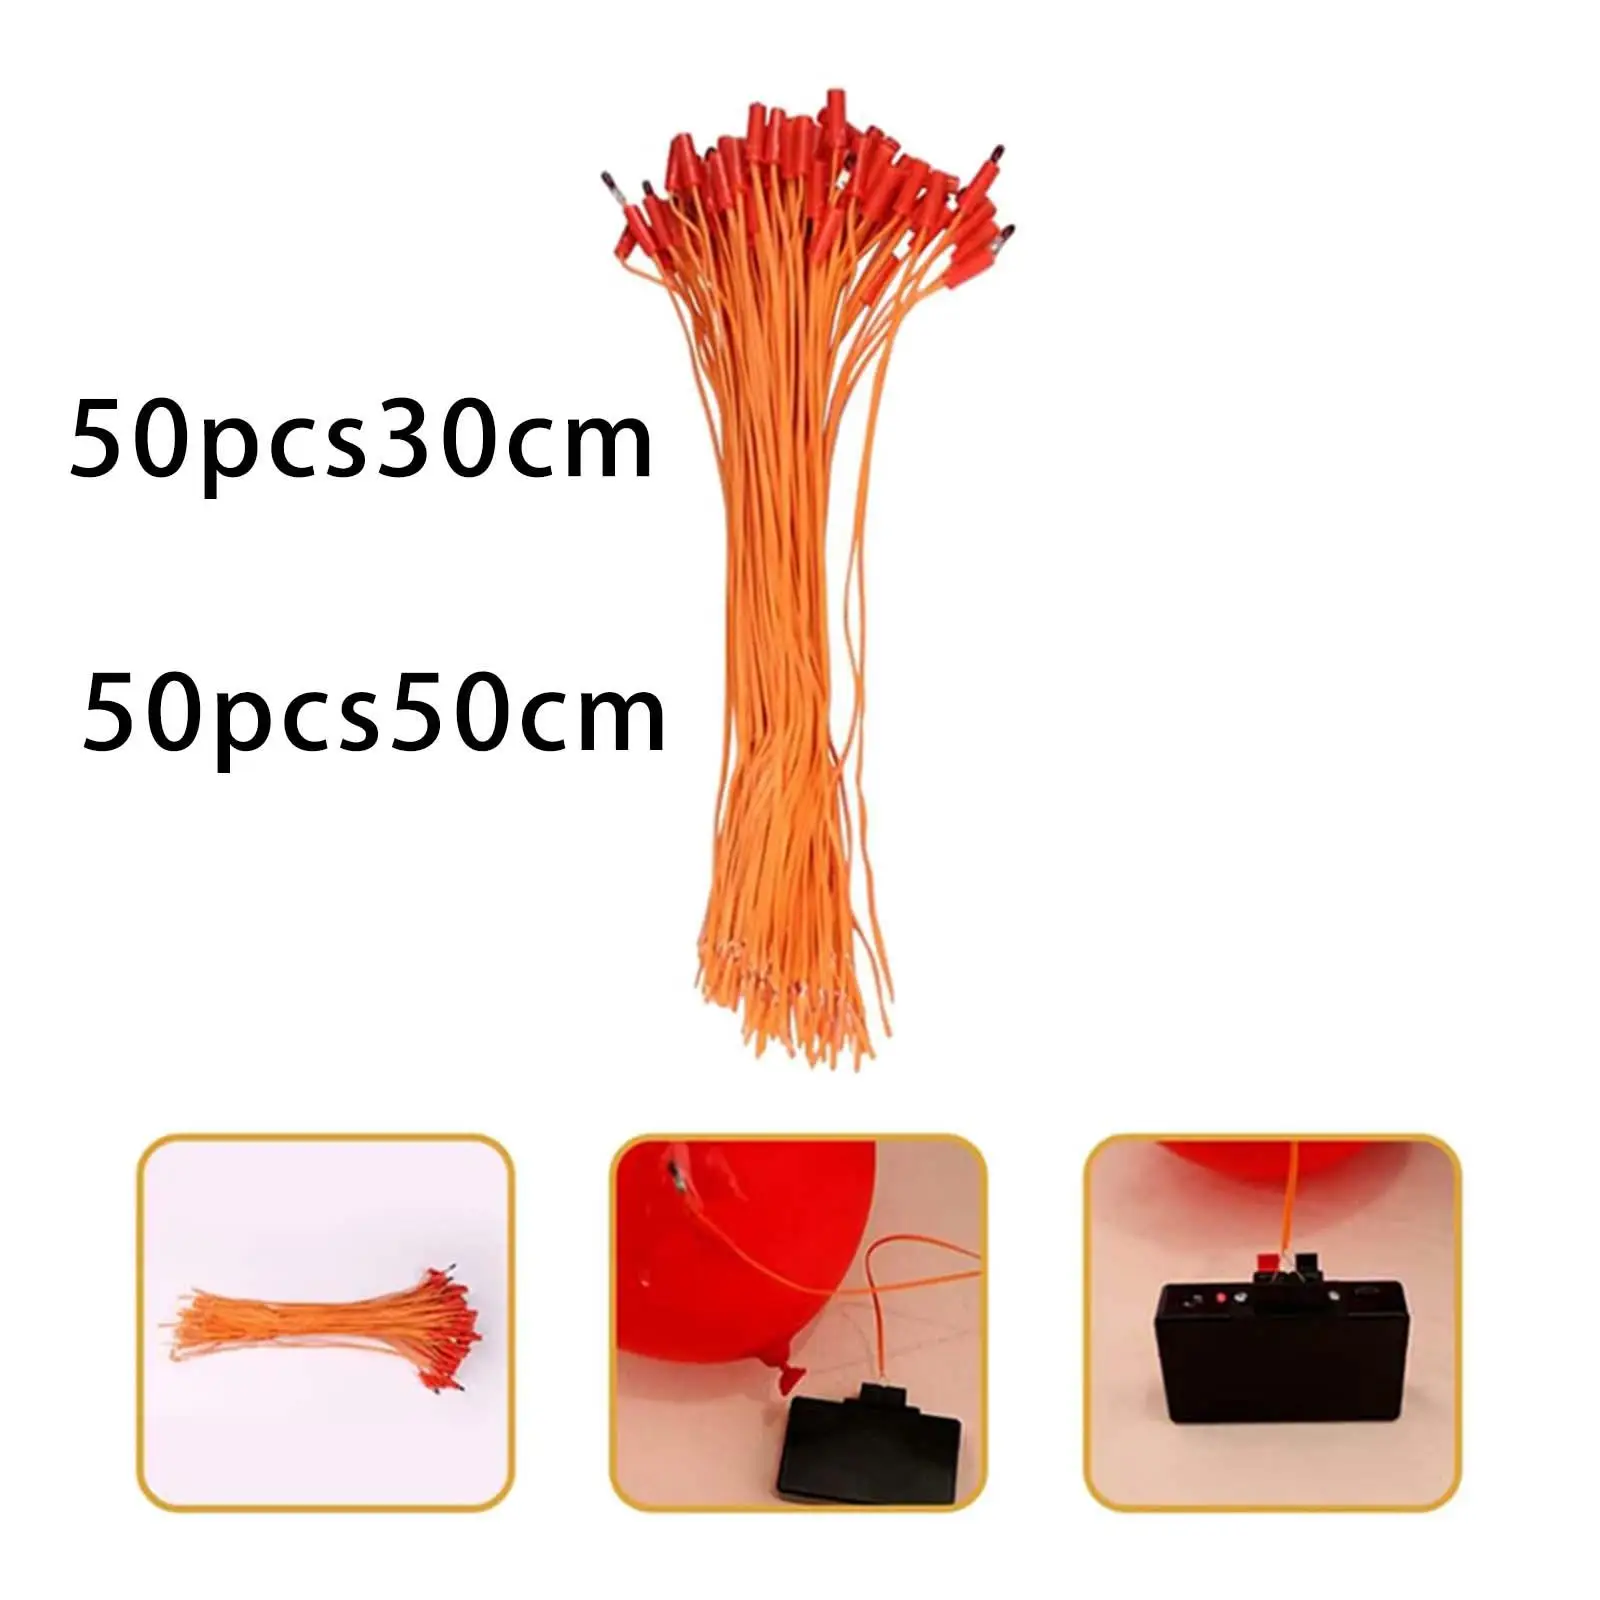 50 Pieces Copper Hookup Wire Fuse Ignition Firing System Electrical for Birthday Portable